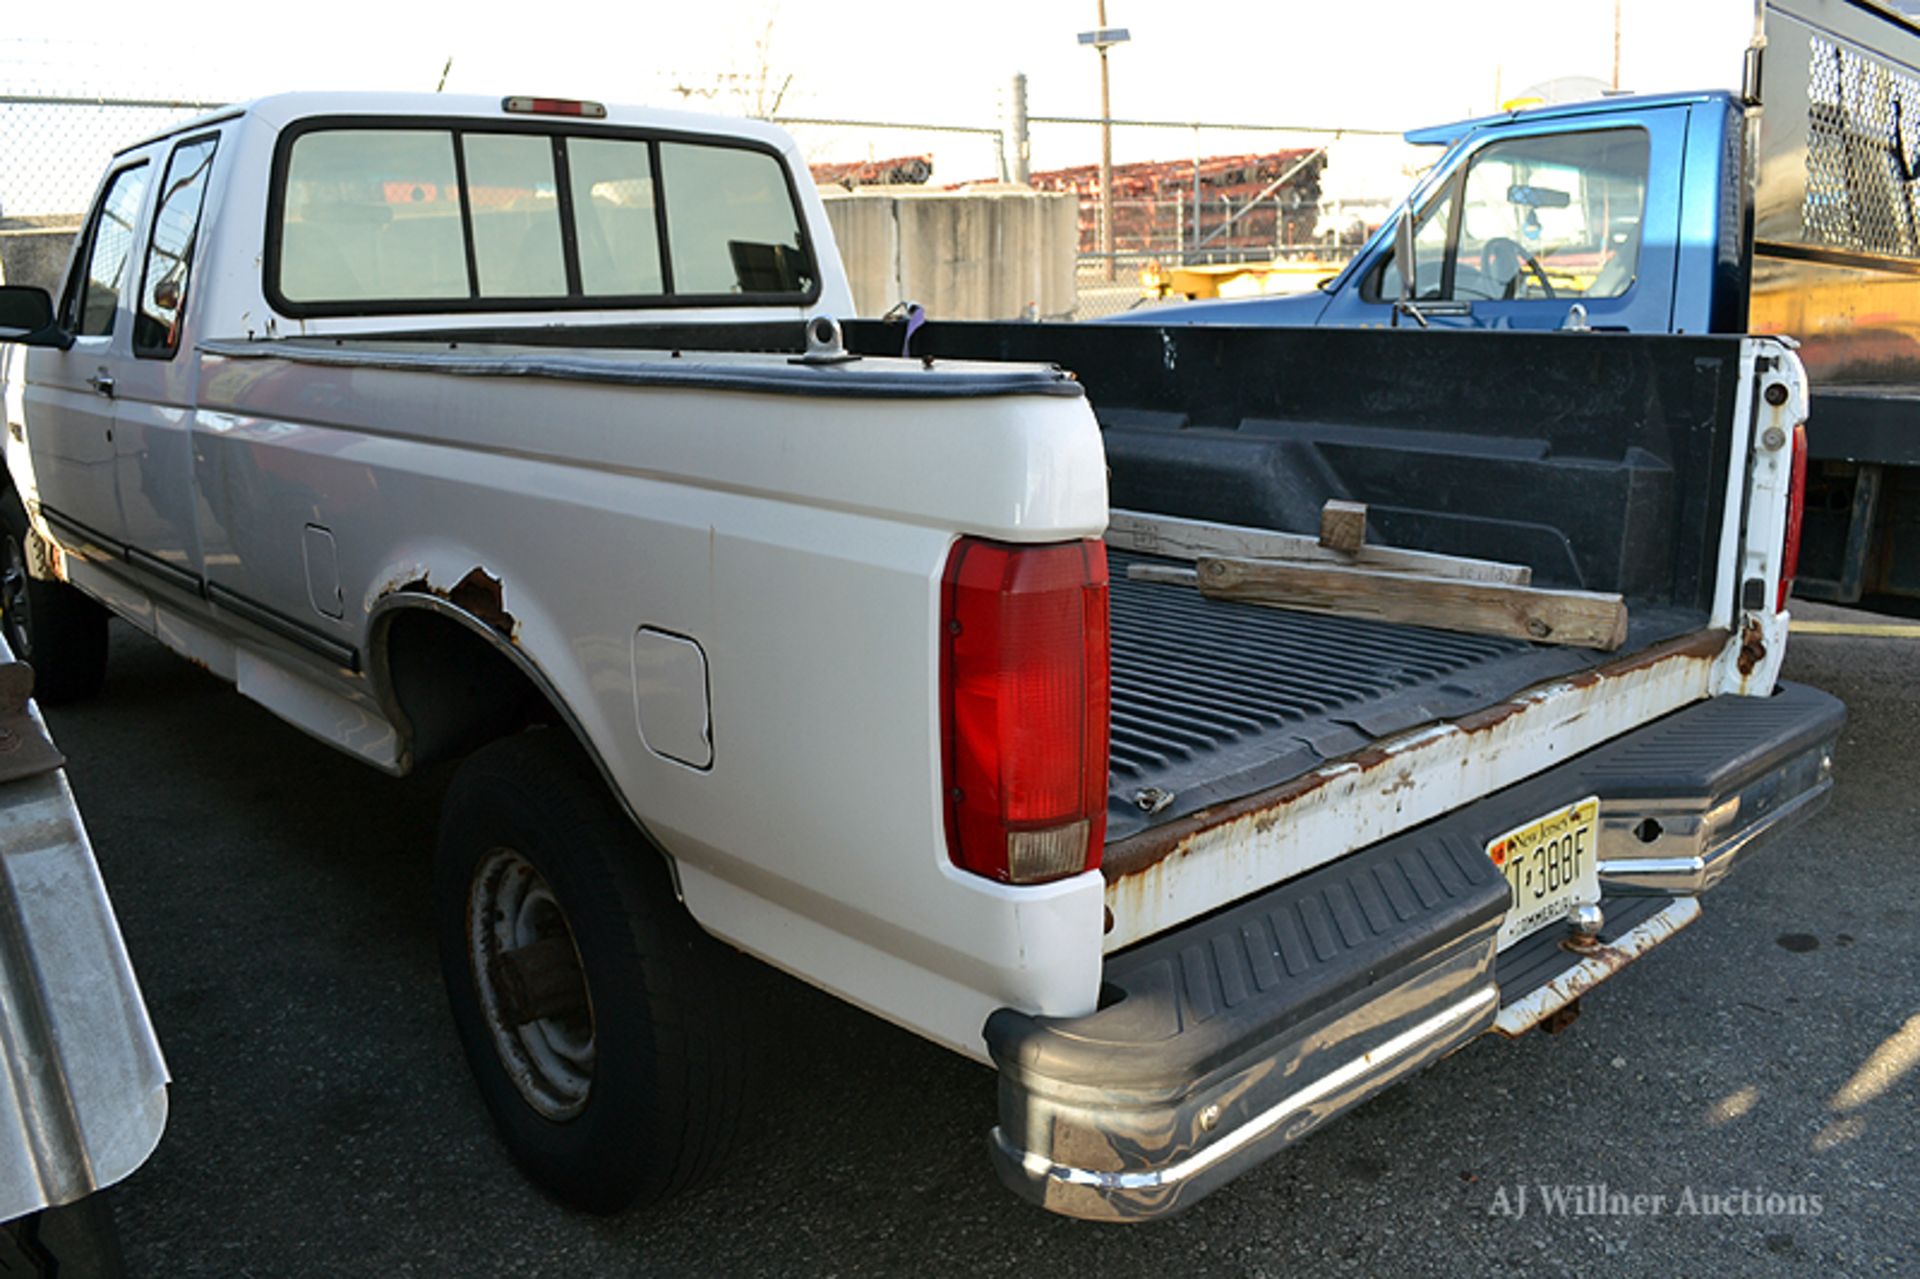 1996 Ford F-250 XLT, 2 door extended cab pick-up truck, - Image 4 of 7